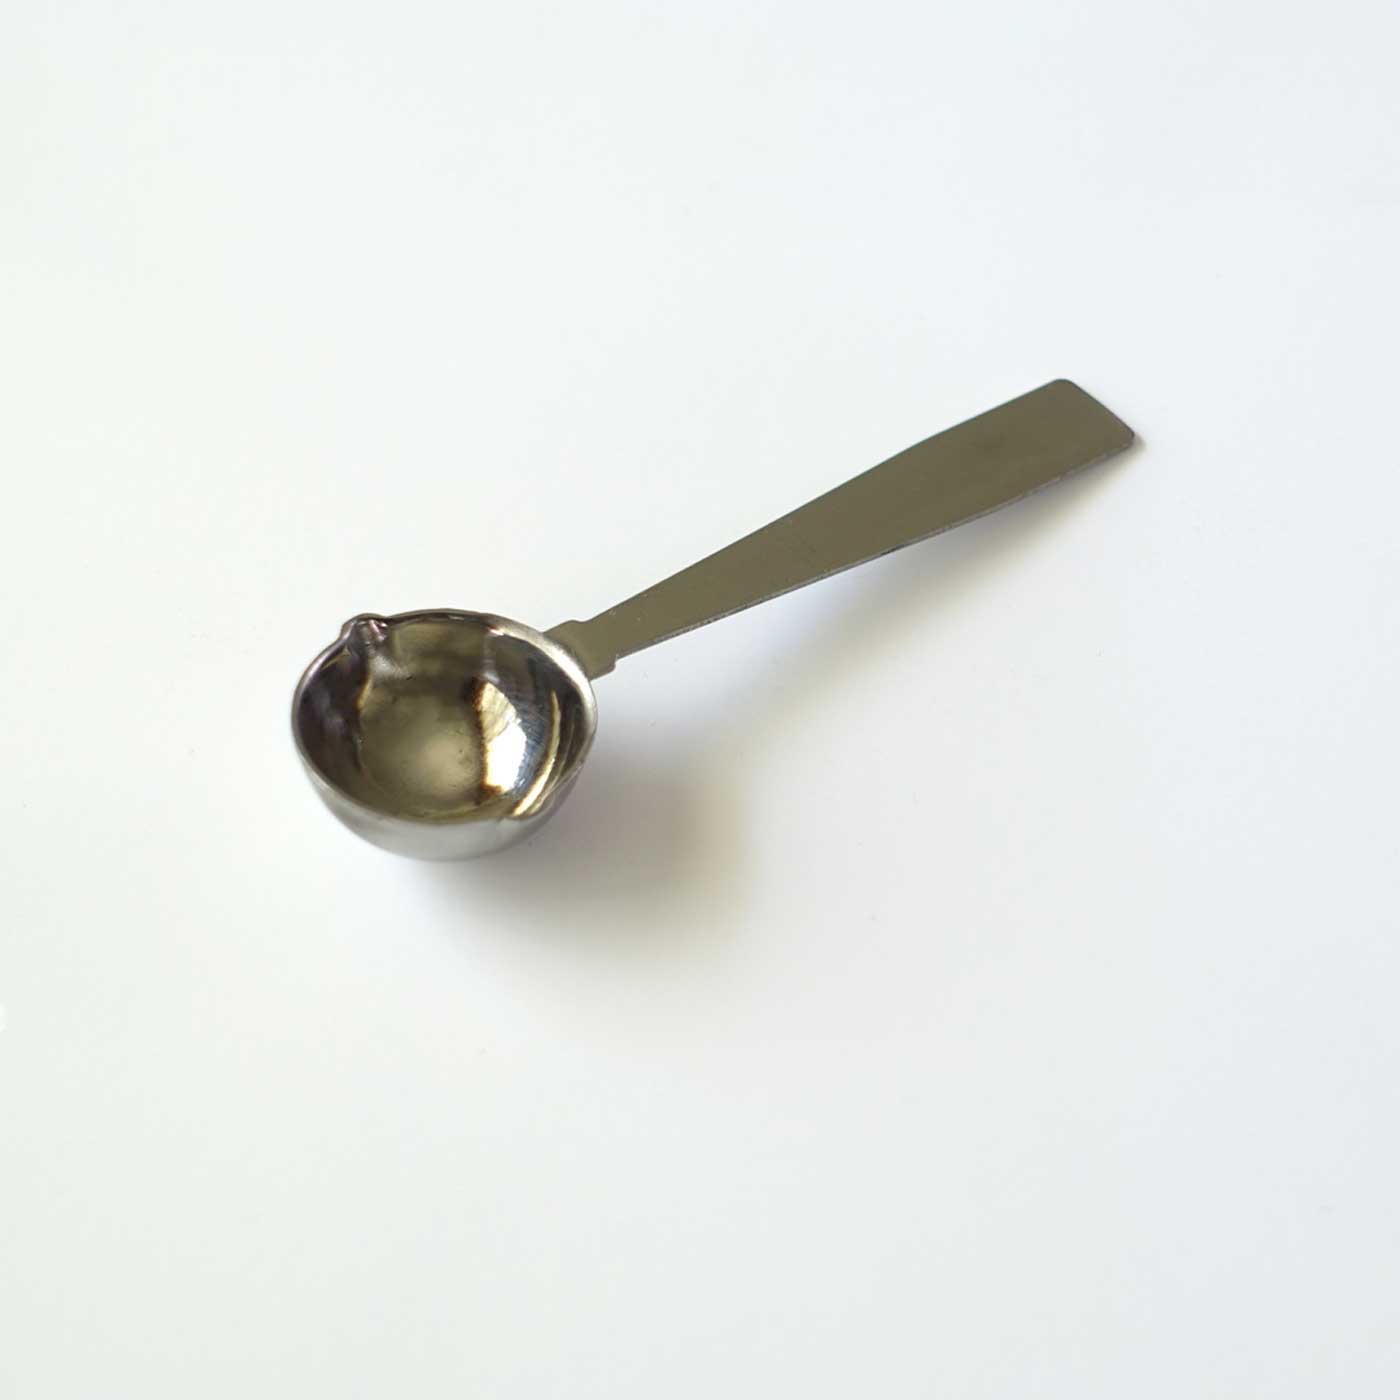 Large big double spout metal wax sealing spoon left hand